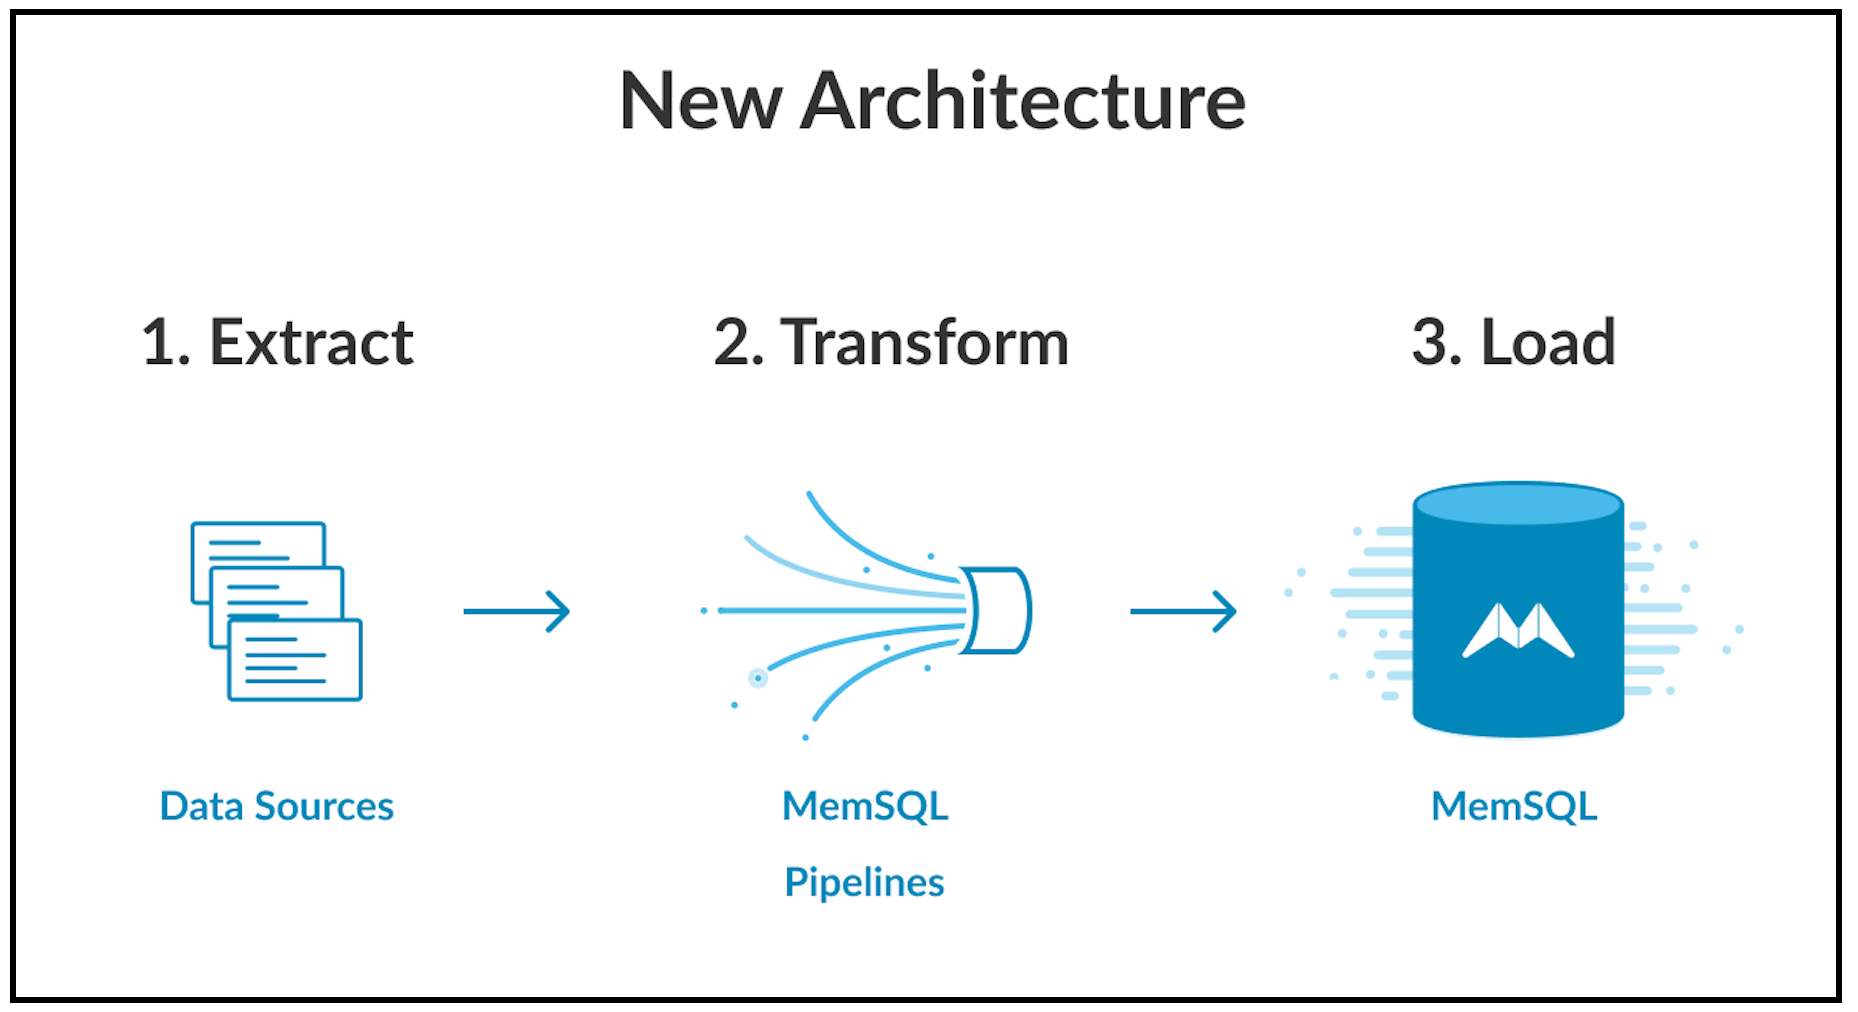 SingleStore uses Pipelines to streamline the old extract, transform, and load (ETL) process